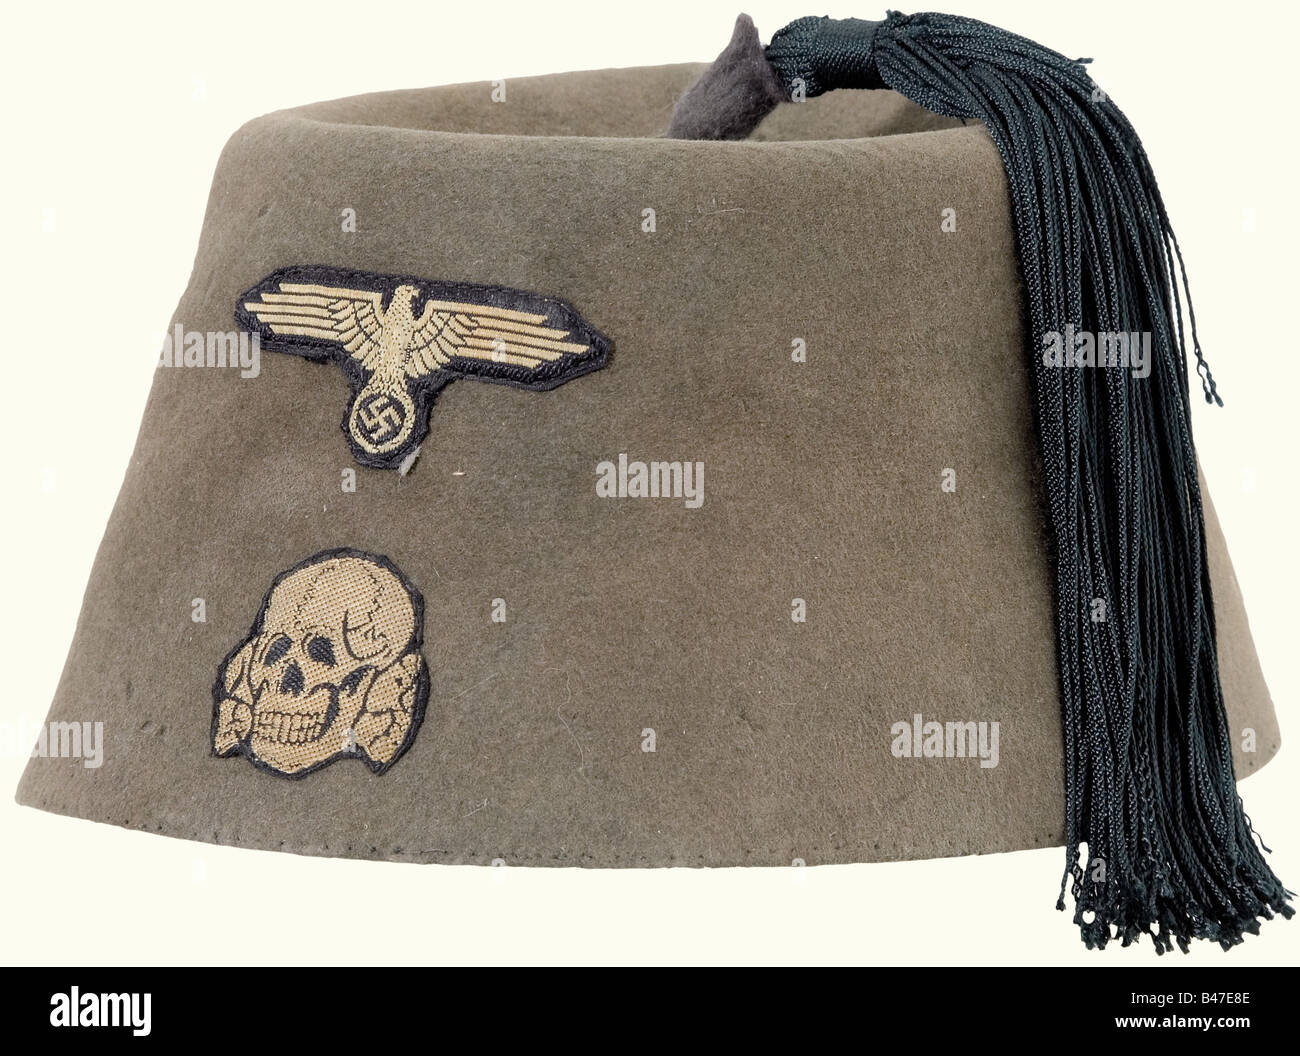 A fez for Enlisted Men/NCOs of the 'Handschar' Division., Field grey felt with a dark green tassel, machine sewn BeVo insignia. Moth damage. Sweatband torn out.' historic, historical, 1930s, 20th century, Waffen-SS, armed division of the SS, armed service, armed services, NS, National Socialism, Nazism, Third Reich, German Reich, Germany, military, militaria, utensil, piece of equipment, utensils, object, objects, stills, clipping, clippings, cut out, cut-out, cut-outs, fascism, fascistic, National Socialist, Nazi, Nazi period, uniform, uniforms, piece of cloth, Stock Photo